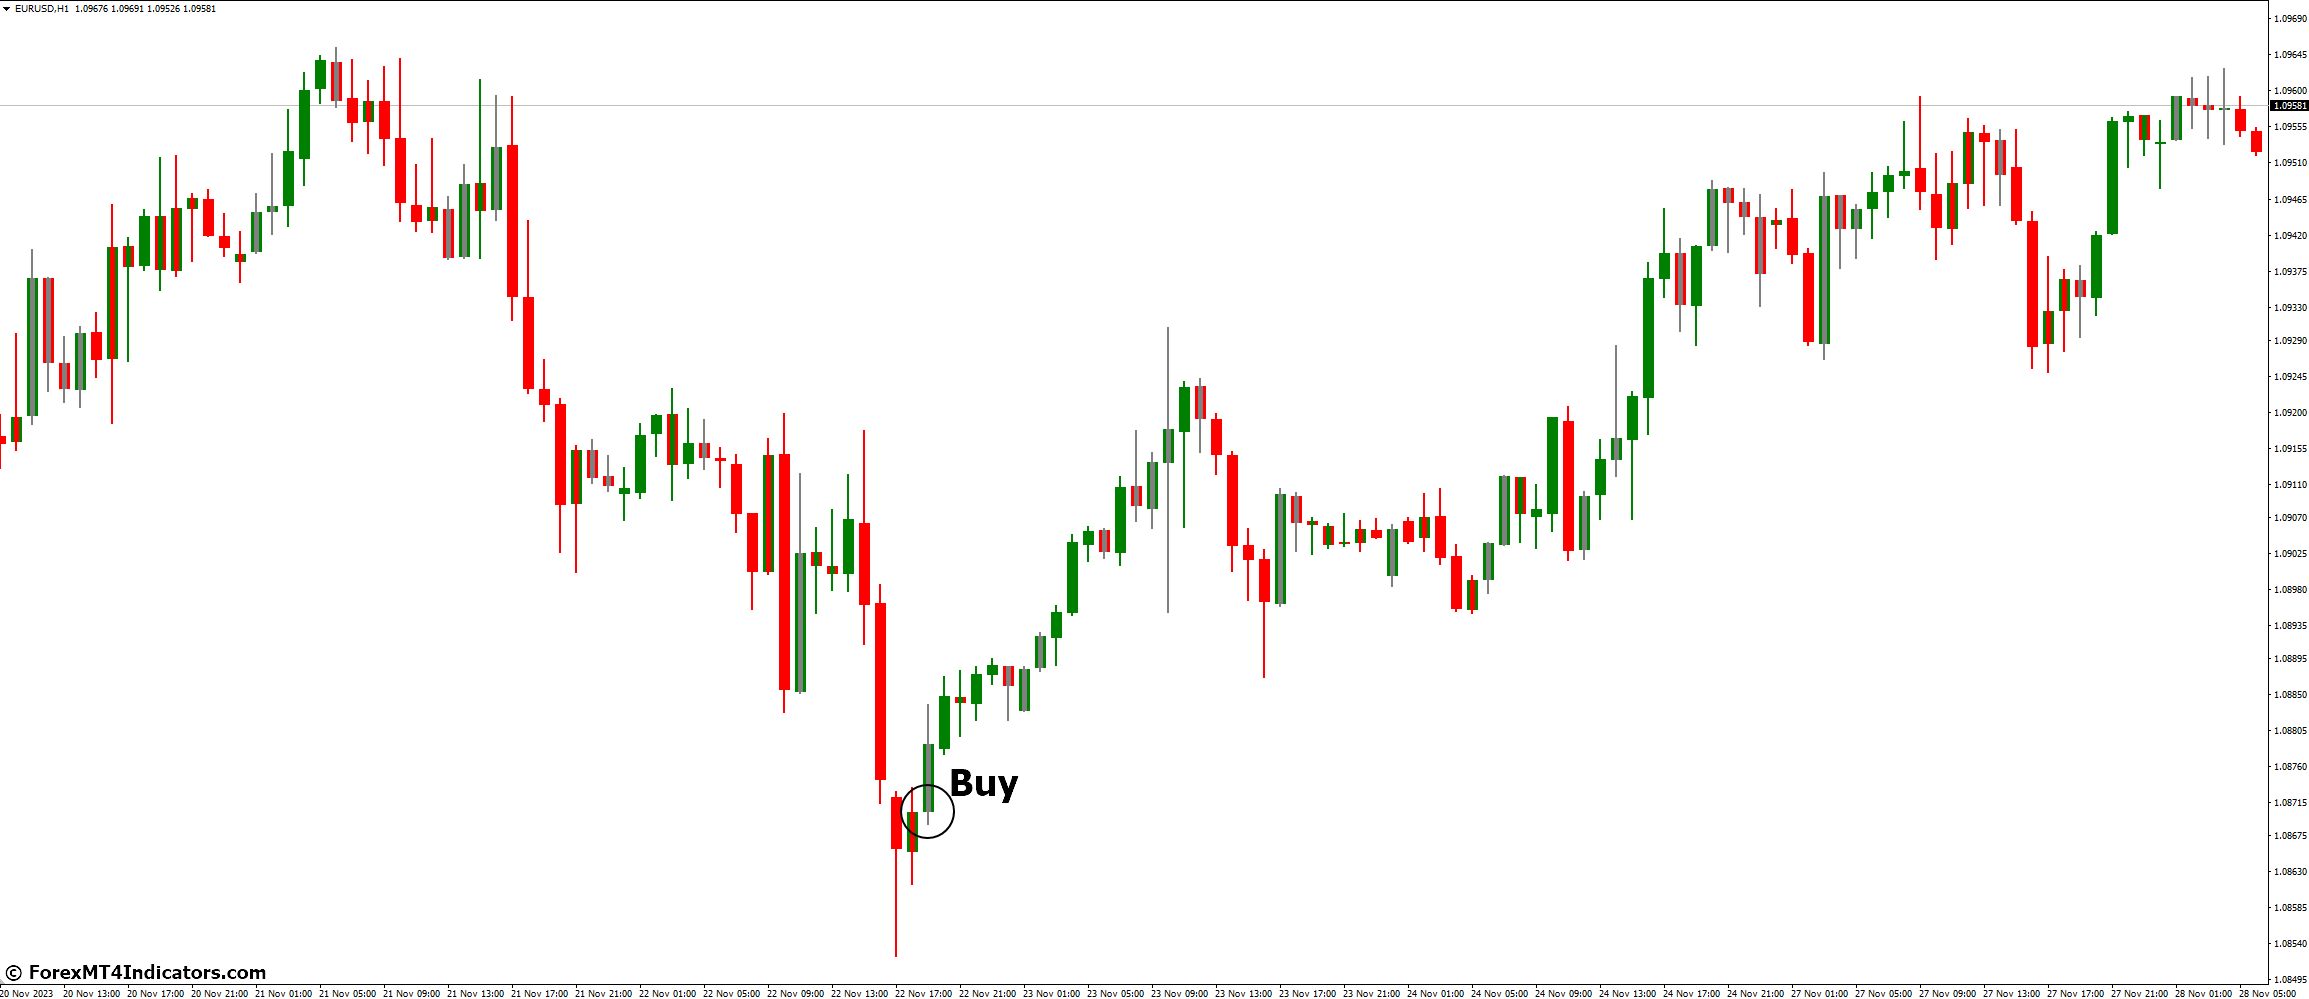 How to Trade with Zone Trade Indicator - Buy Entry